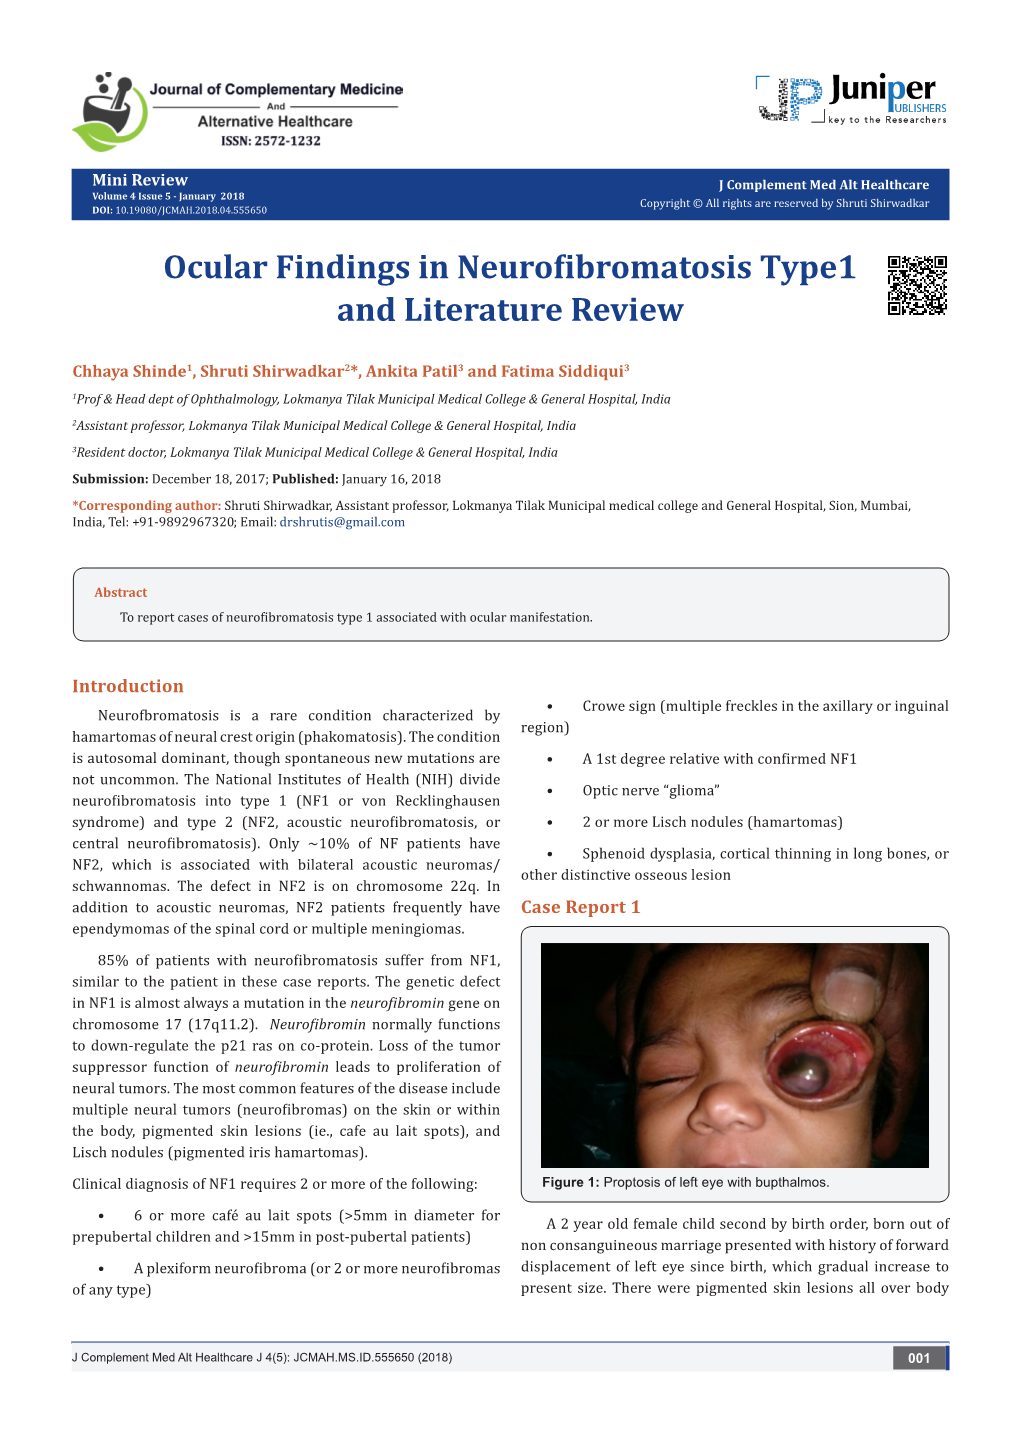 Ocular Findings in Neurofibromatosis Type1 and Literature Review